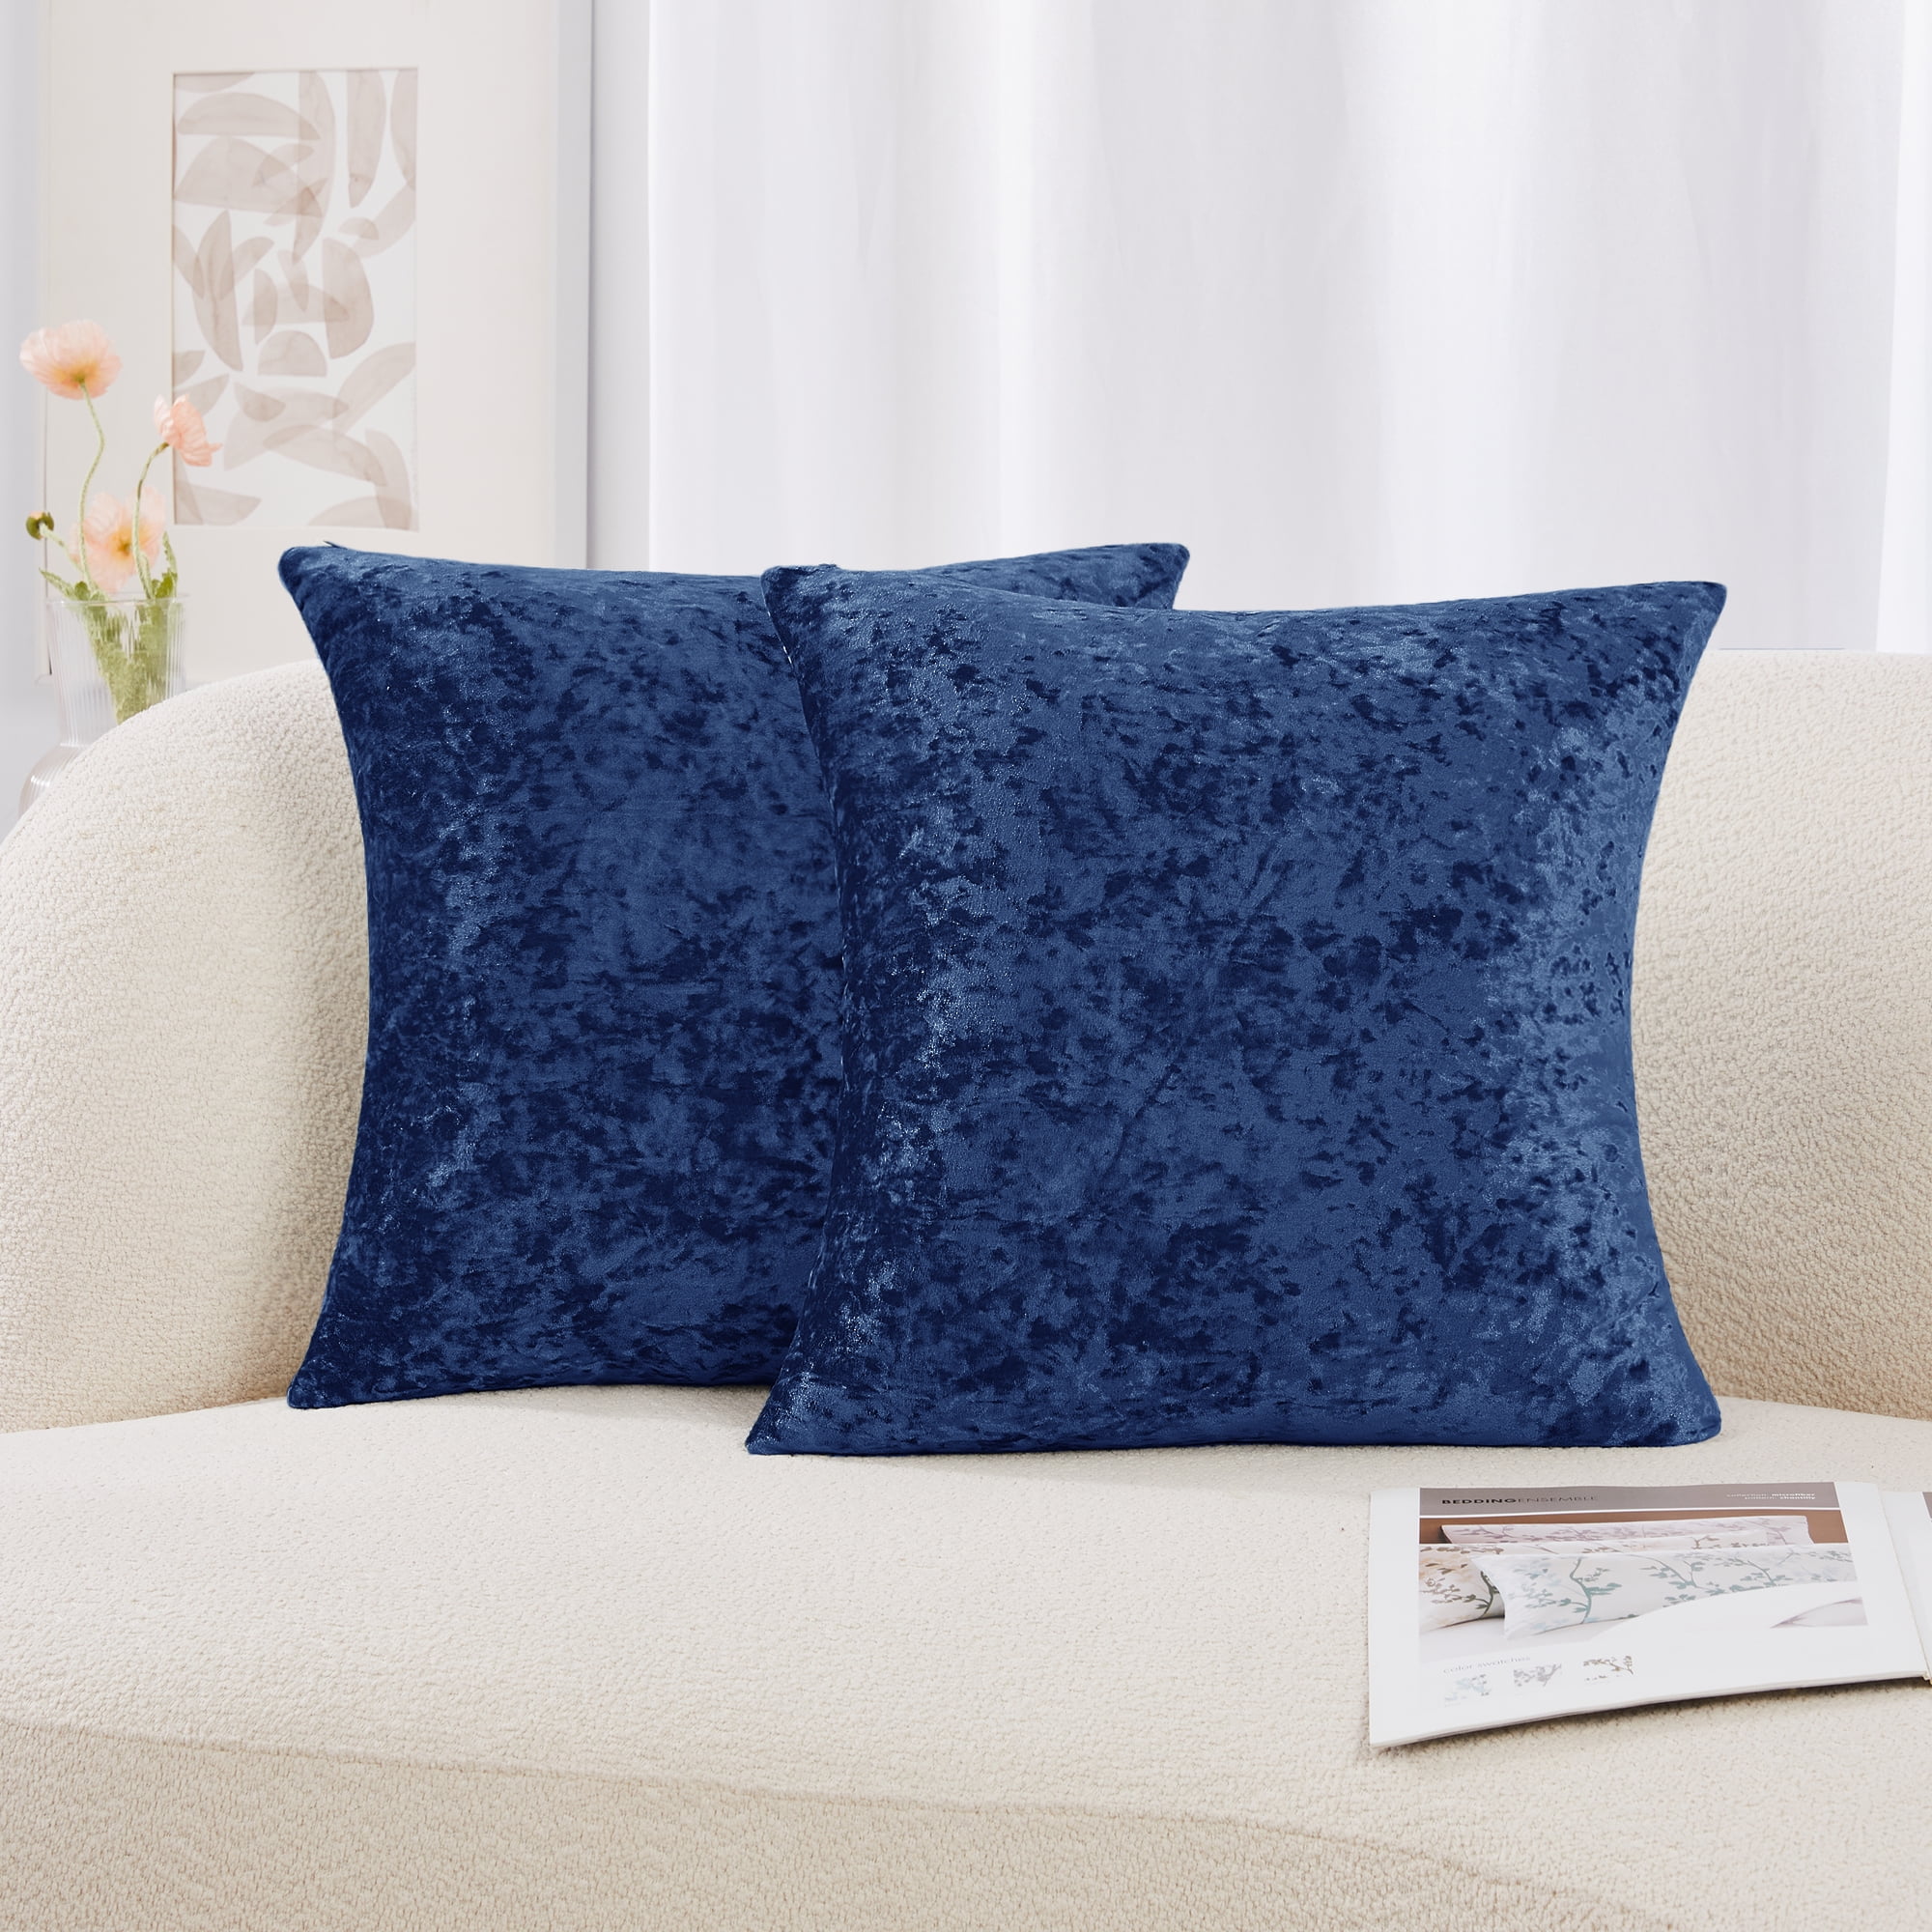 Blue Soft Velvet Throw Pillow Covers 18x18 Set of 4, Large Square  Decorative Couch Pillows Cases Cover Solid Color for Cushions Sofa Living  Bed Room